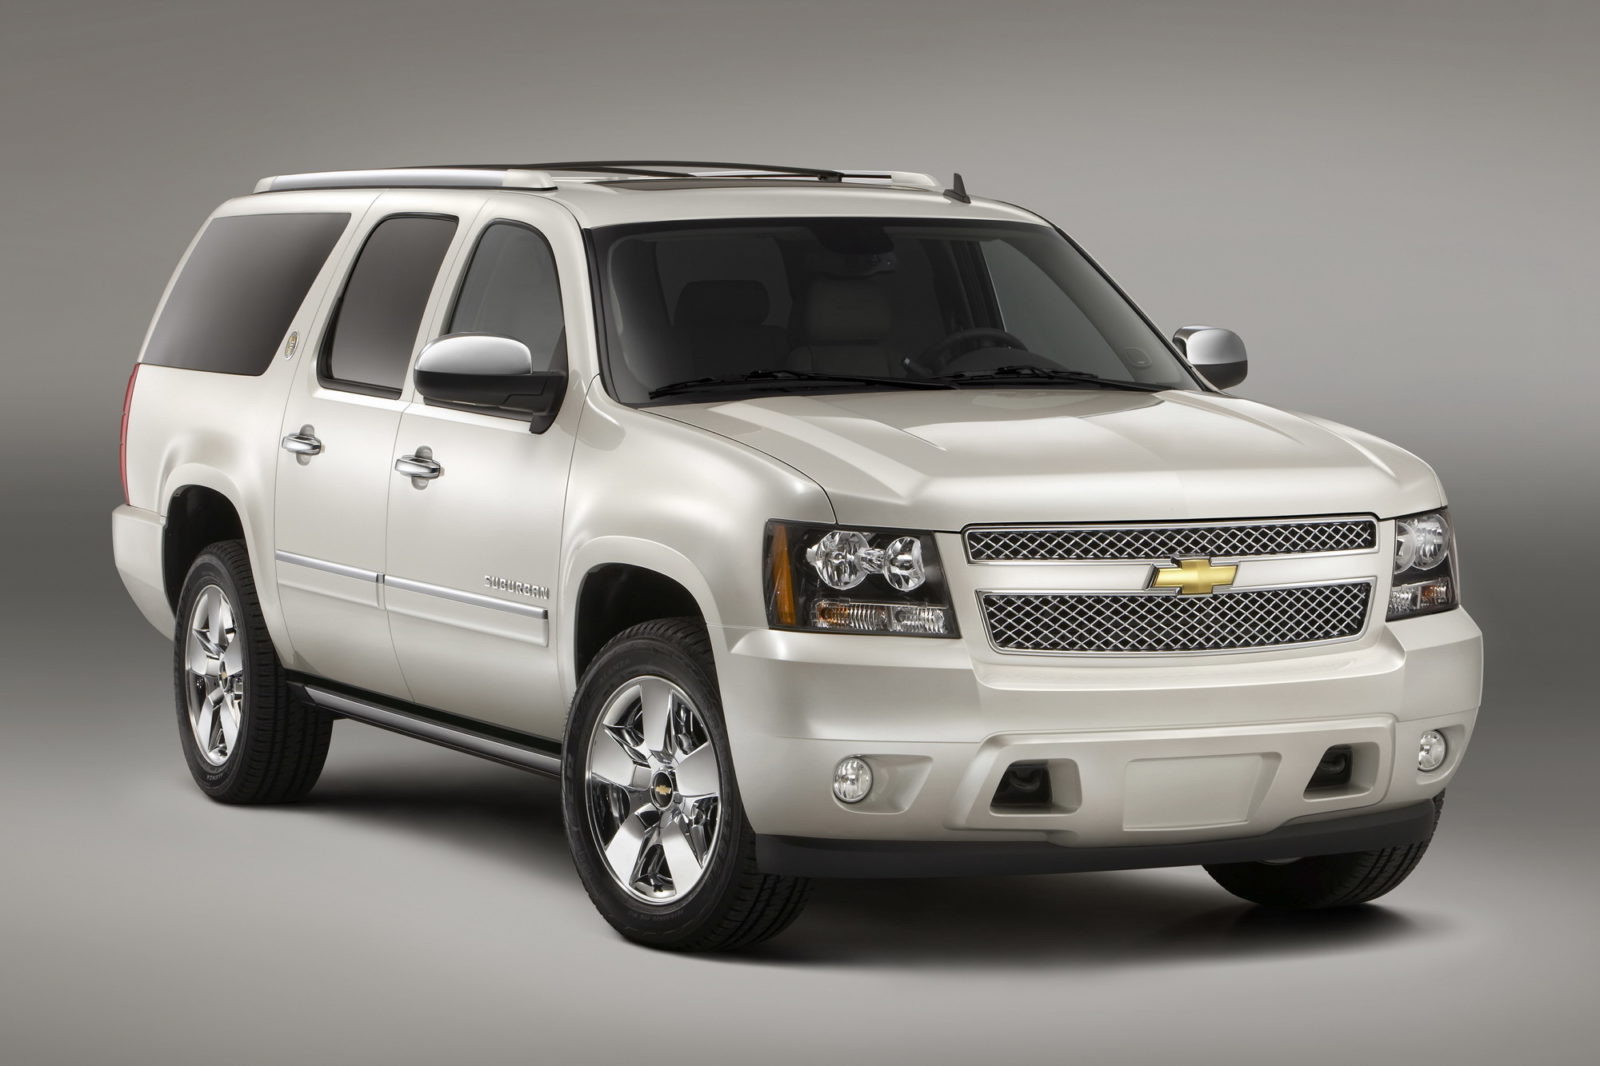 A Brief History of the Chevrolet Suburban - Everything You Need To Know